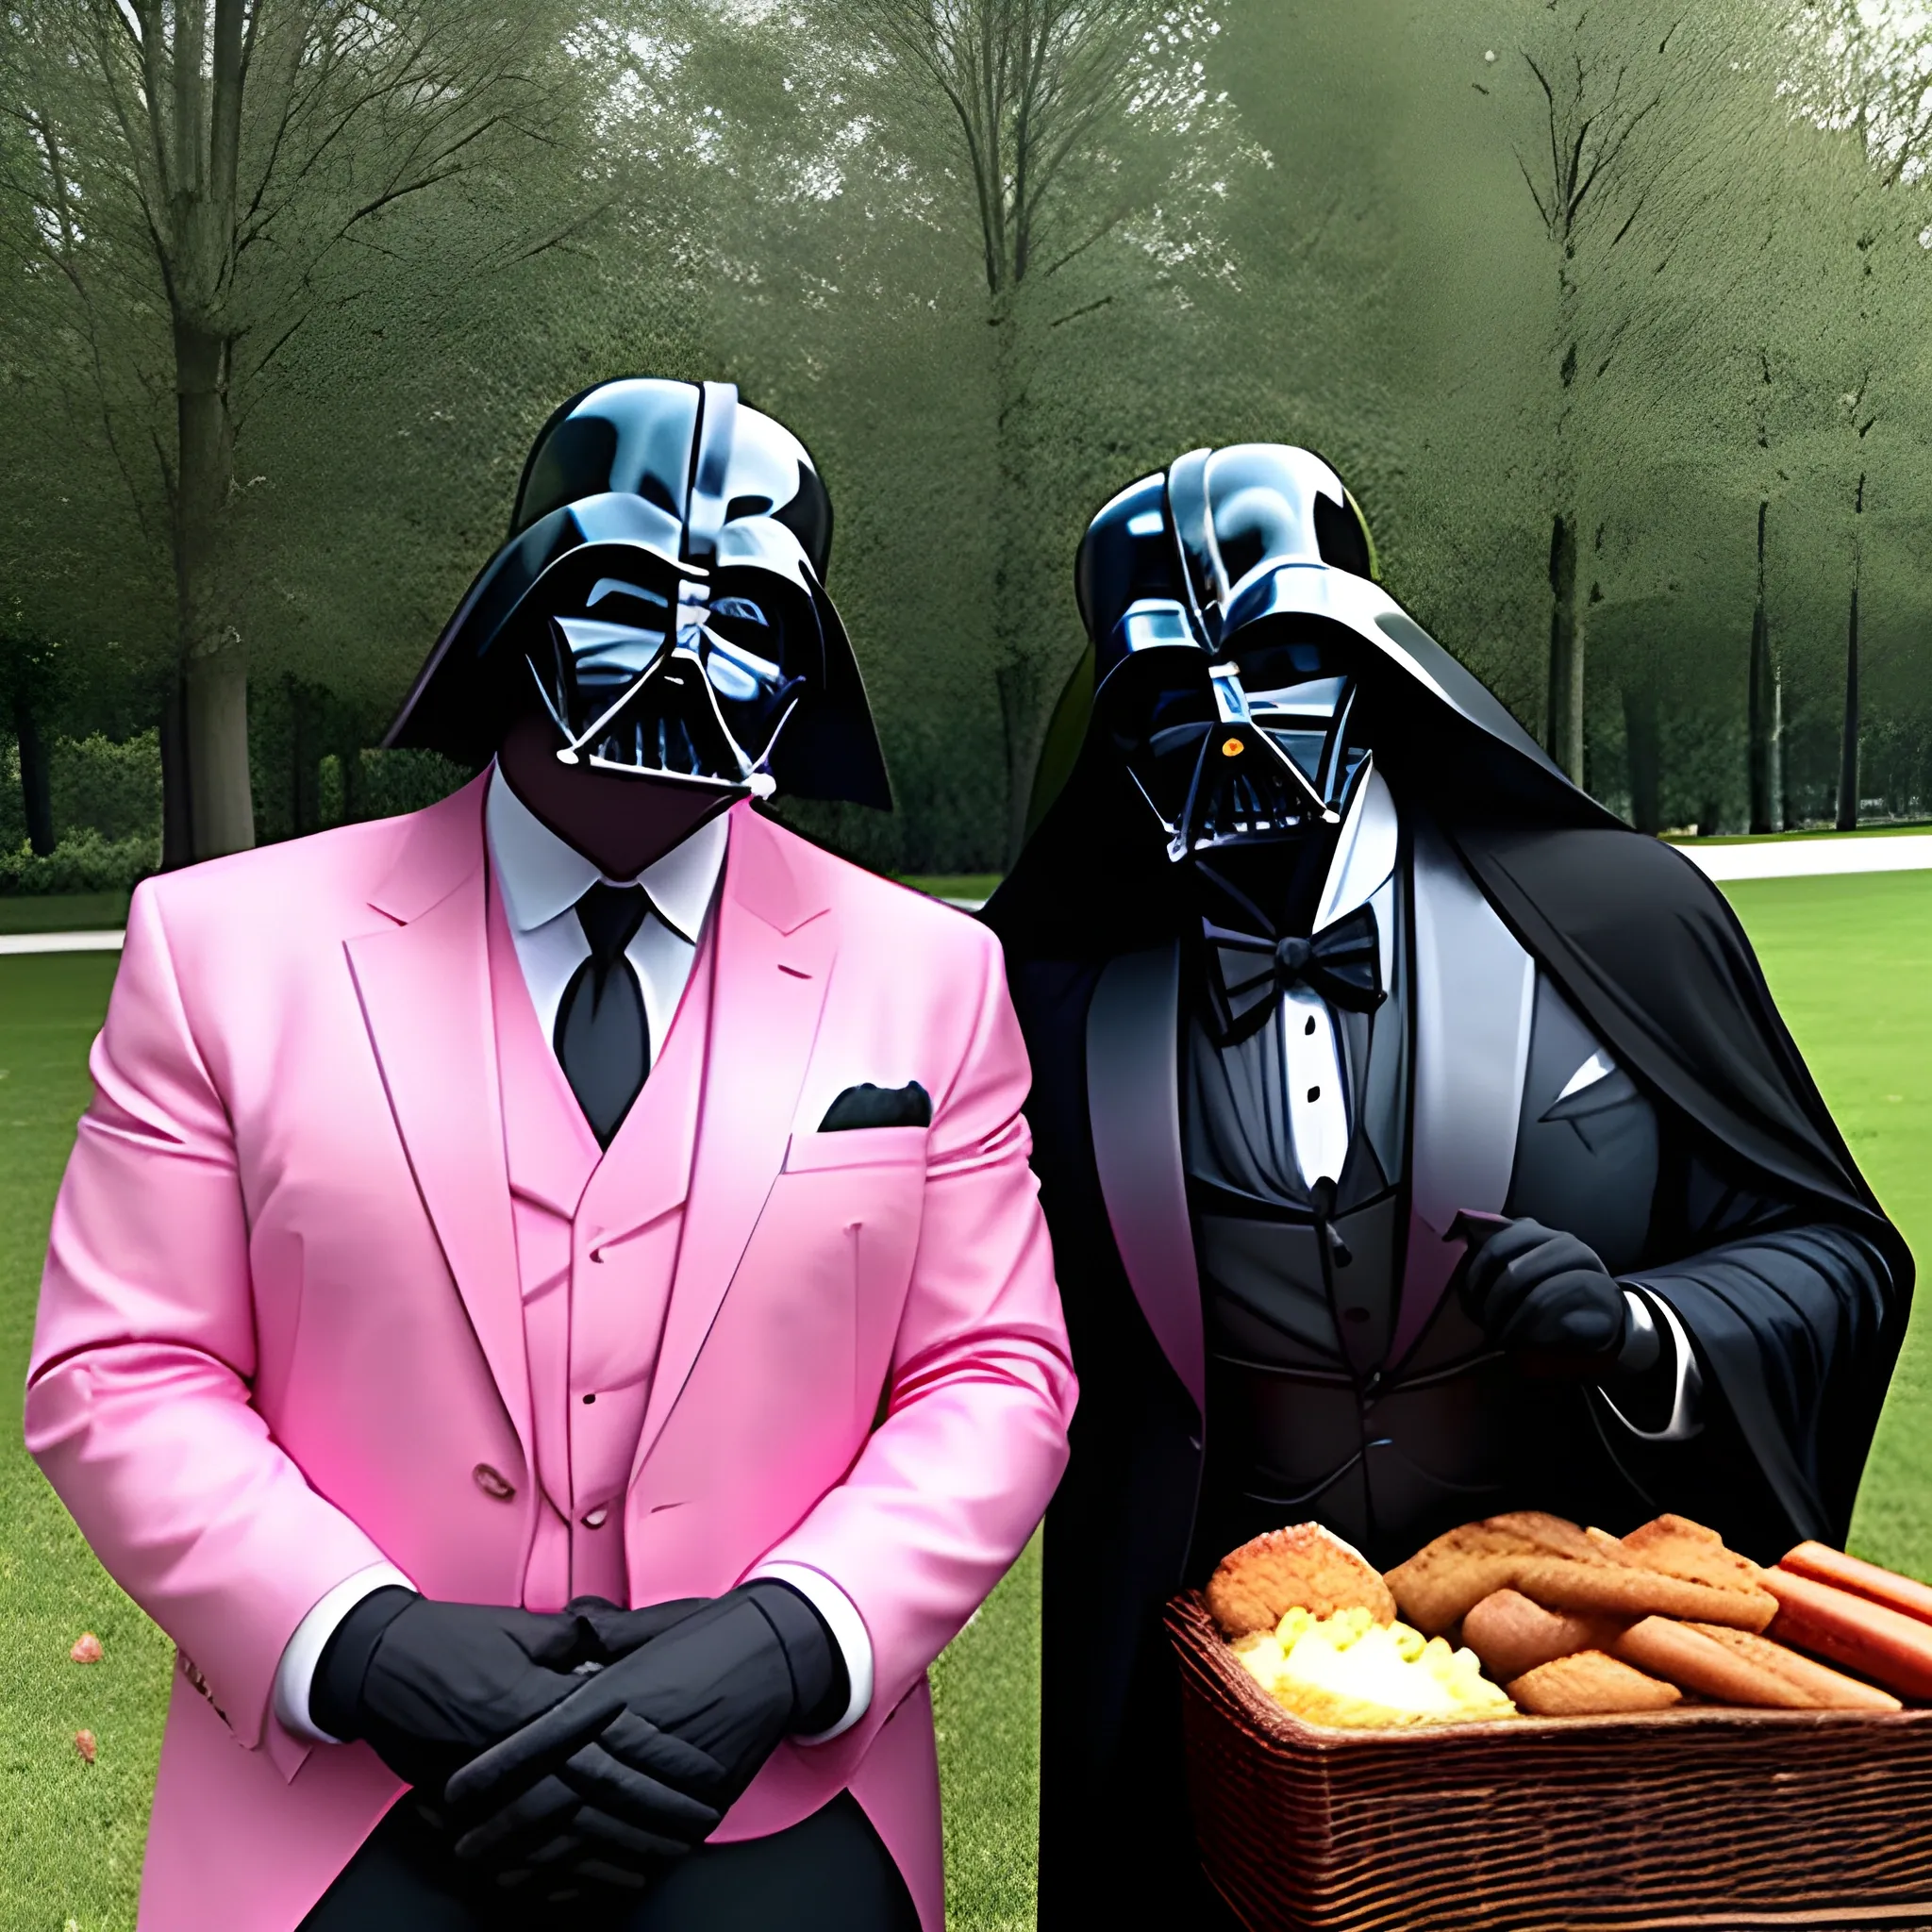 a dark vader father, a dark vader mother in a pink suit, a dark vader child and an old dark vader grandfather in a picnic